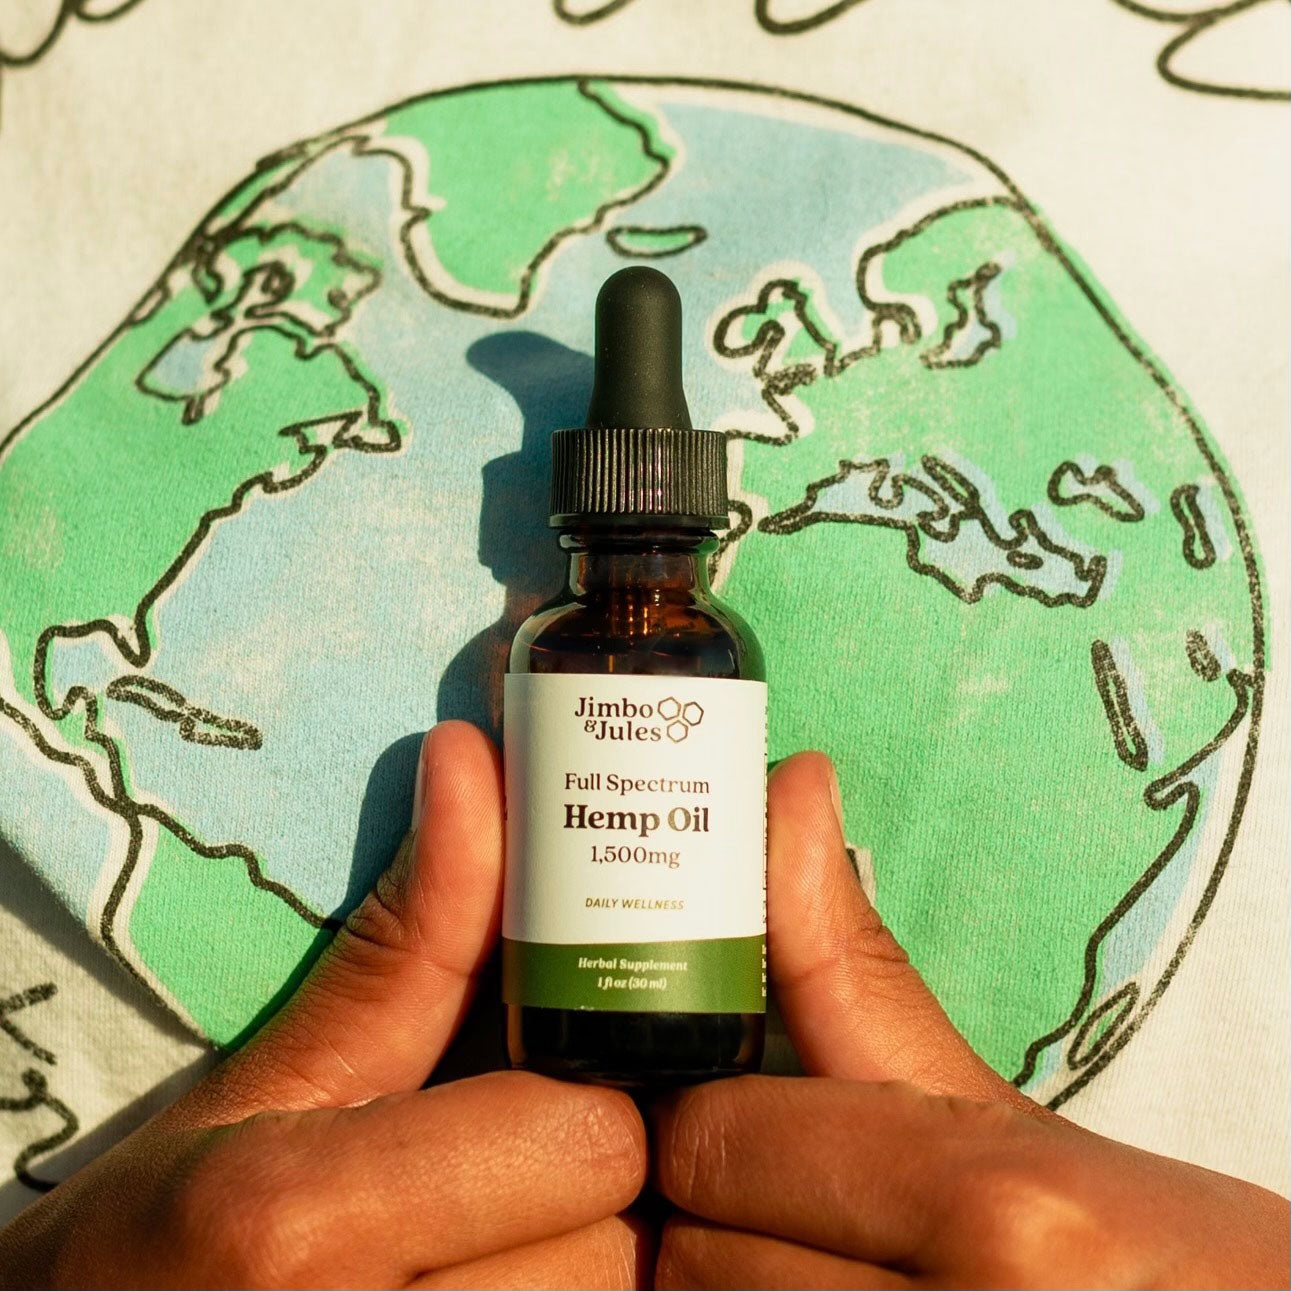 Two hands holding Jimbo & Jules 1,500mg Full Spectrum Hemp Oil in front of a shirt with a drawing of the Earth on it.